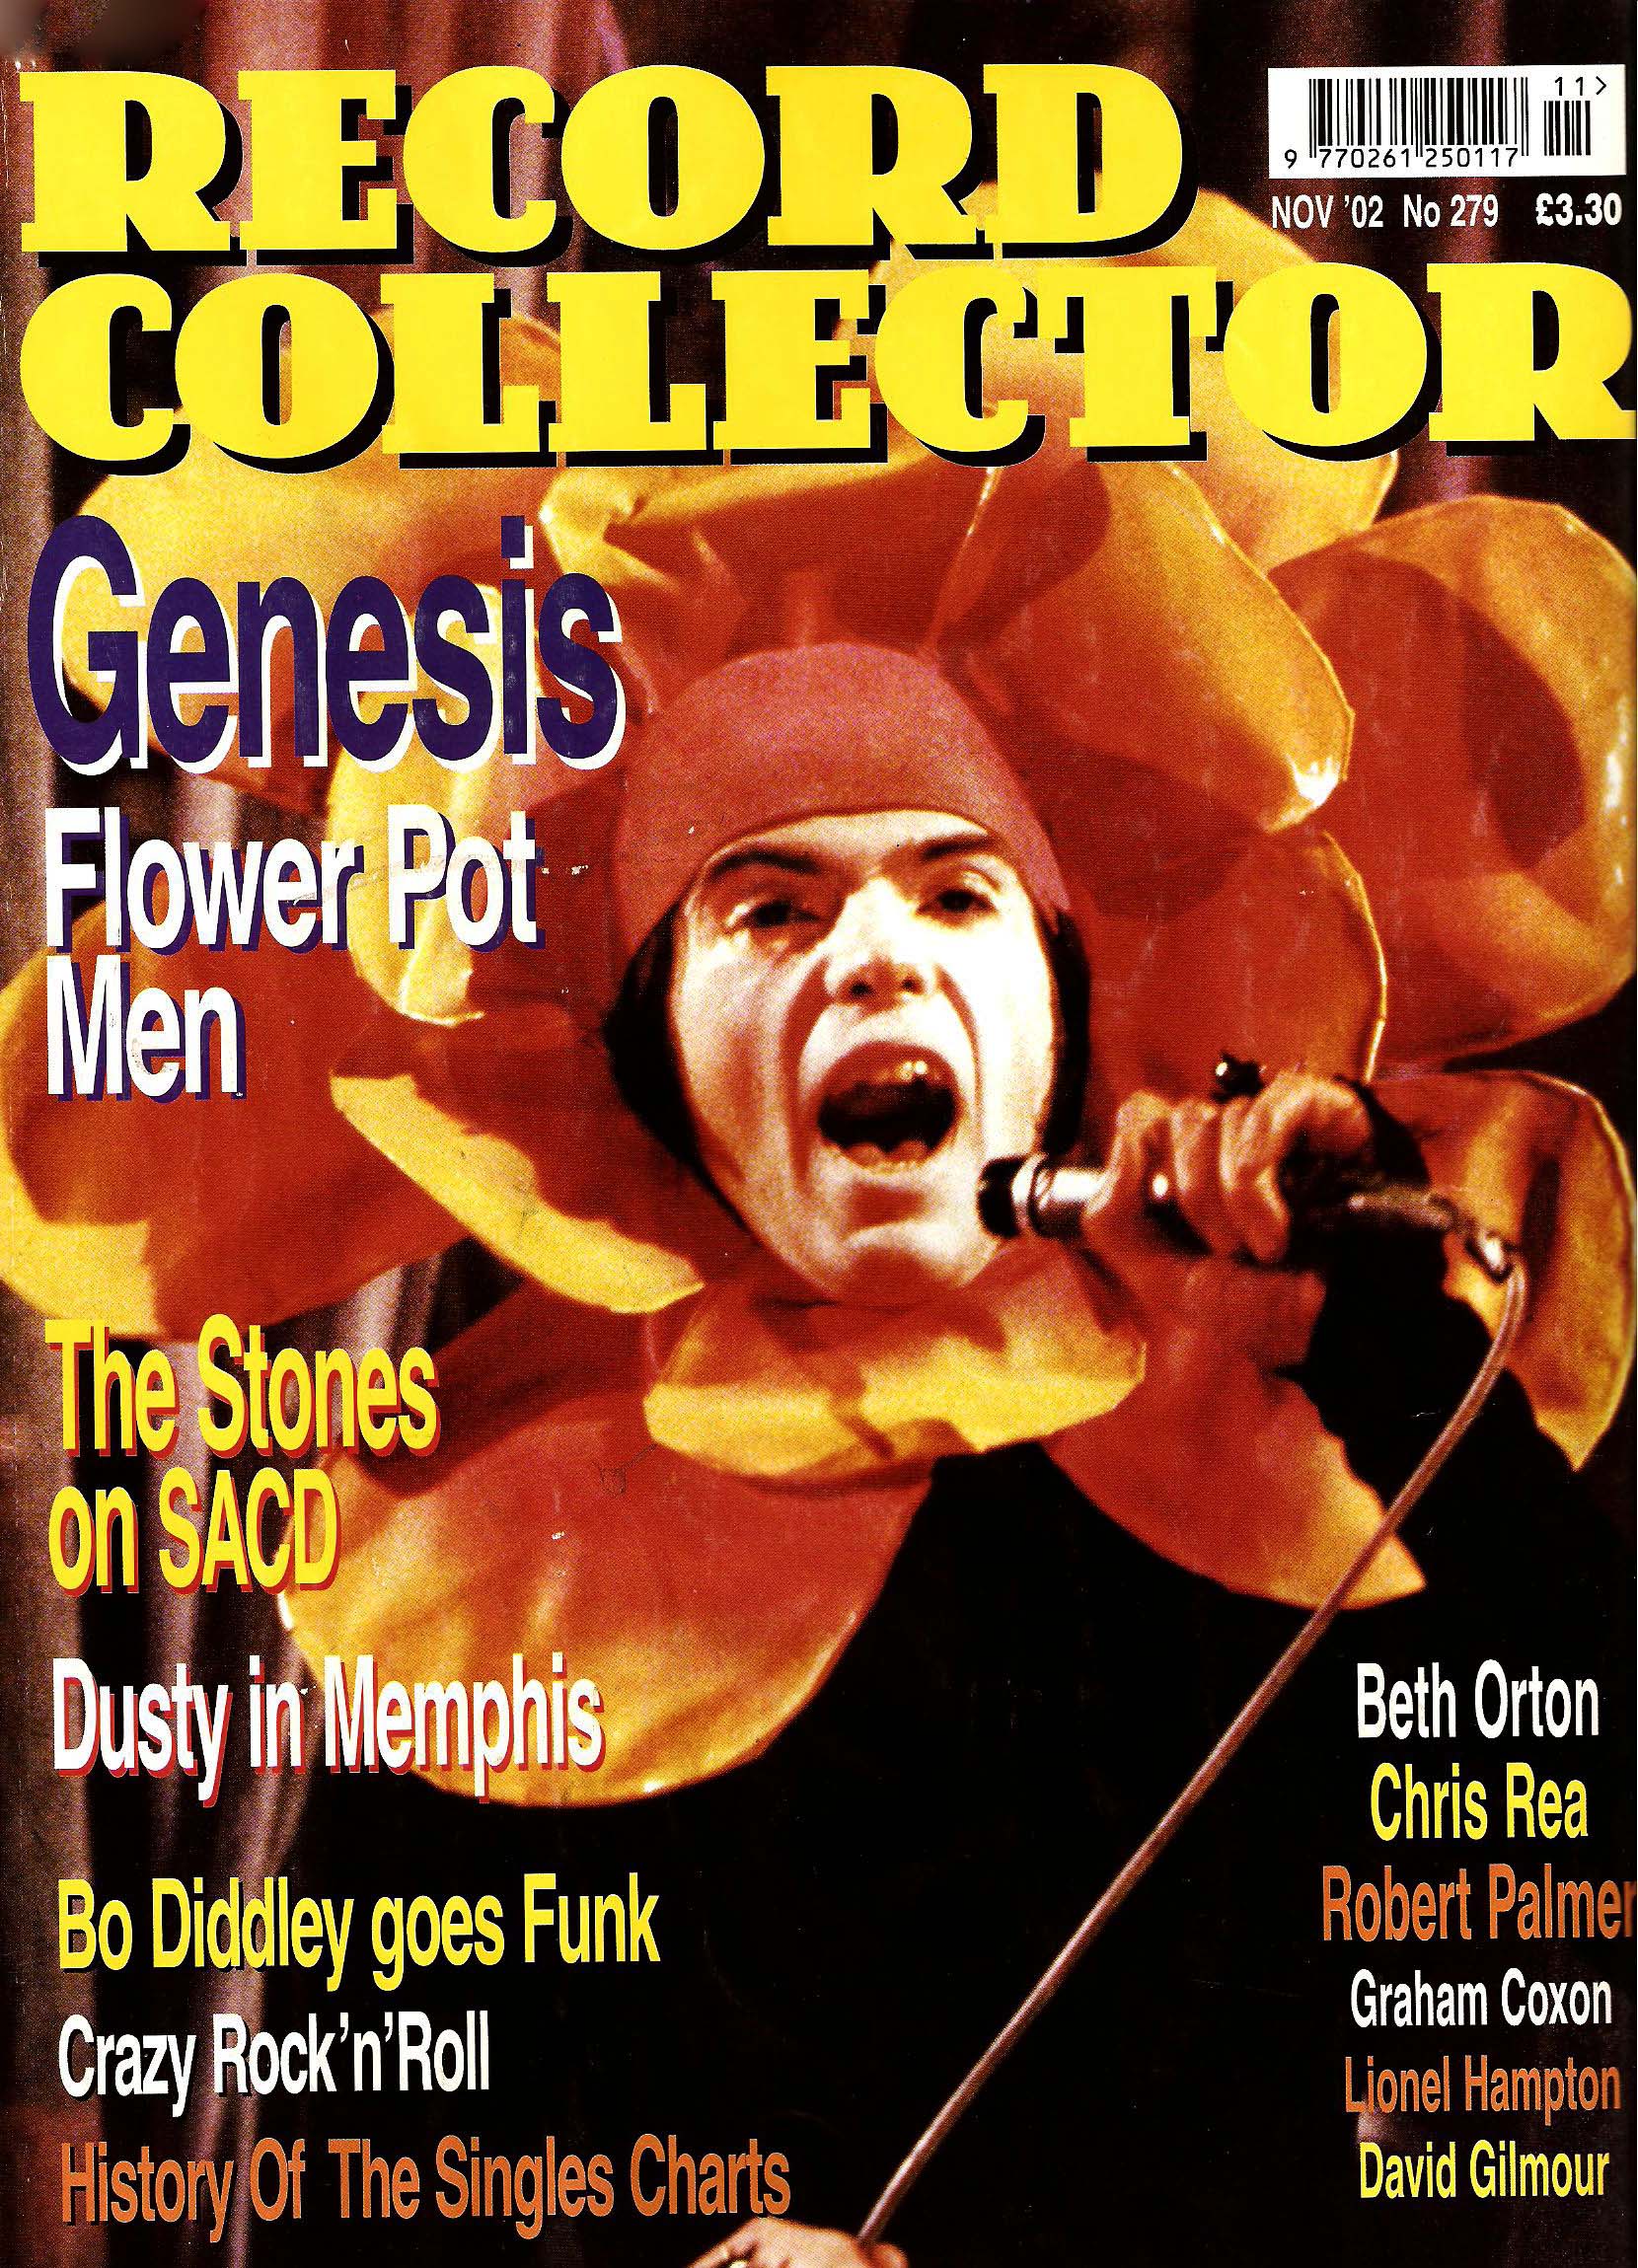 Record Collector November 2002 – Genesis feature – The Genesis Archive